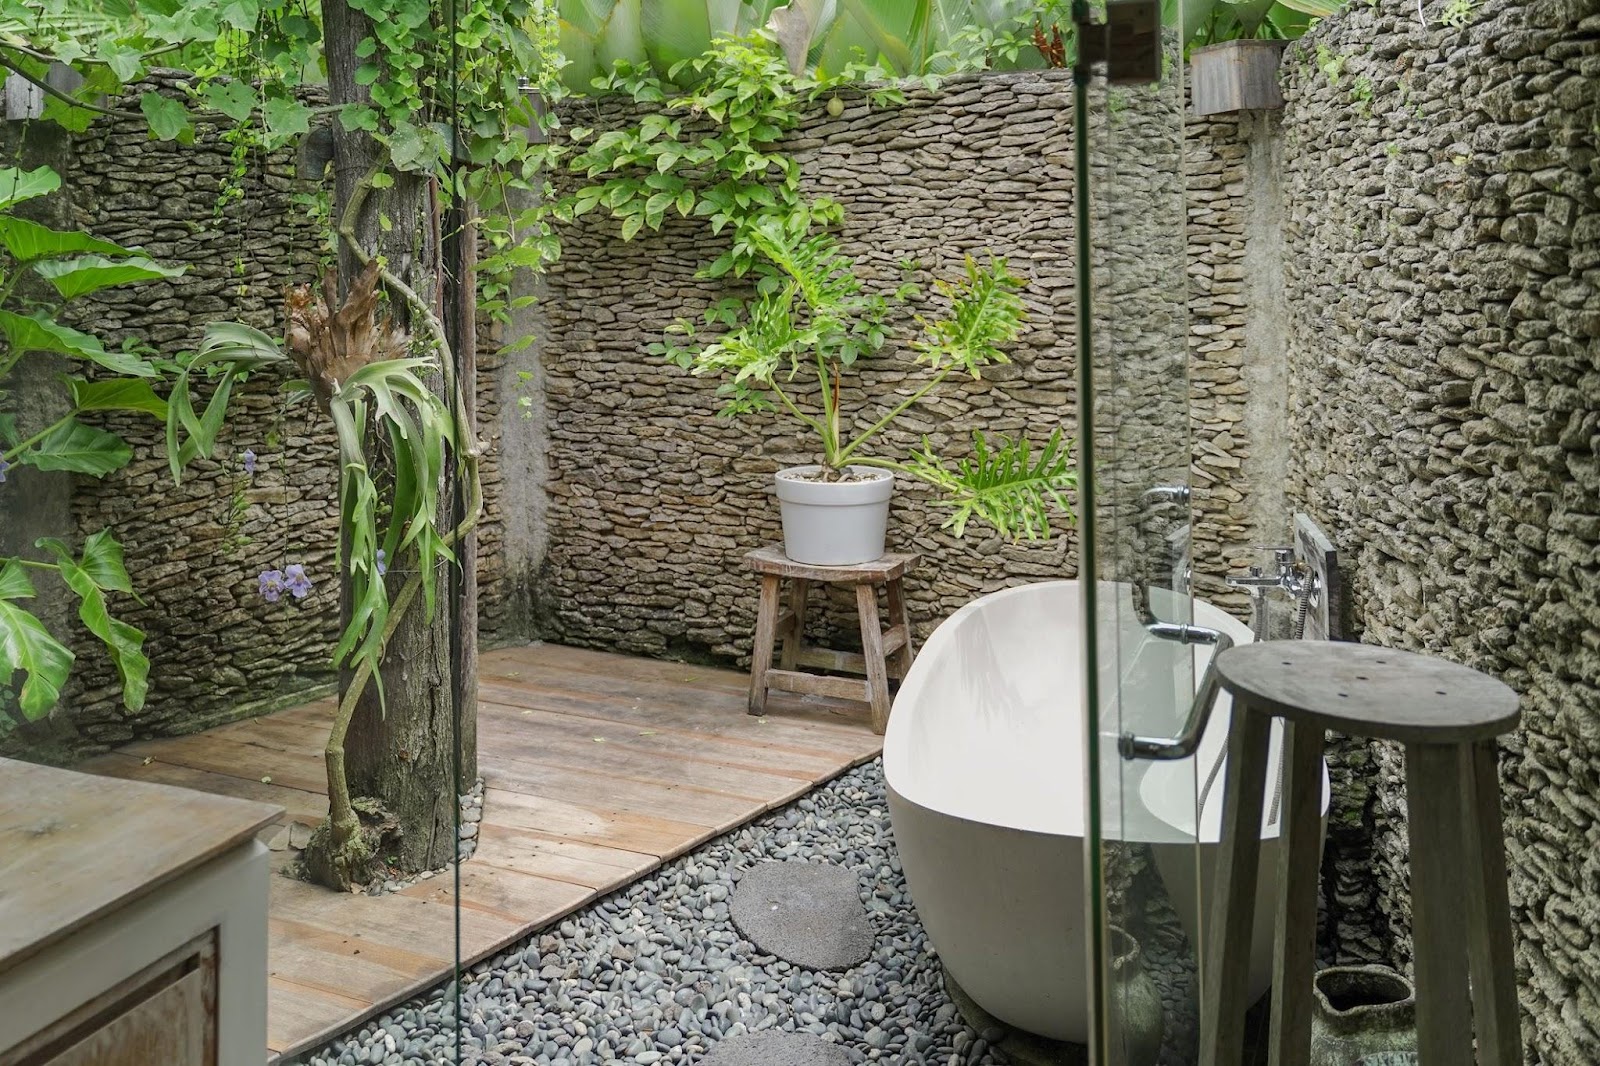 How to Choose an Outdoor Bathtub